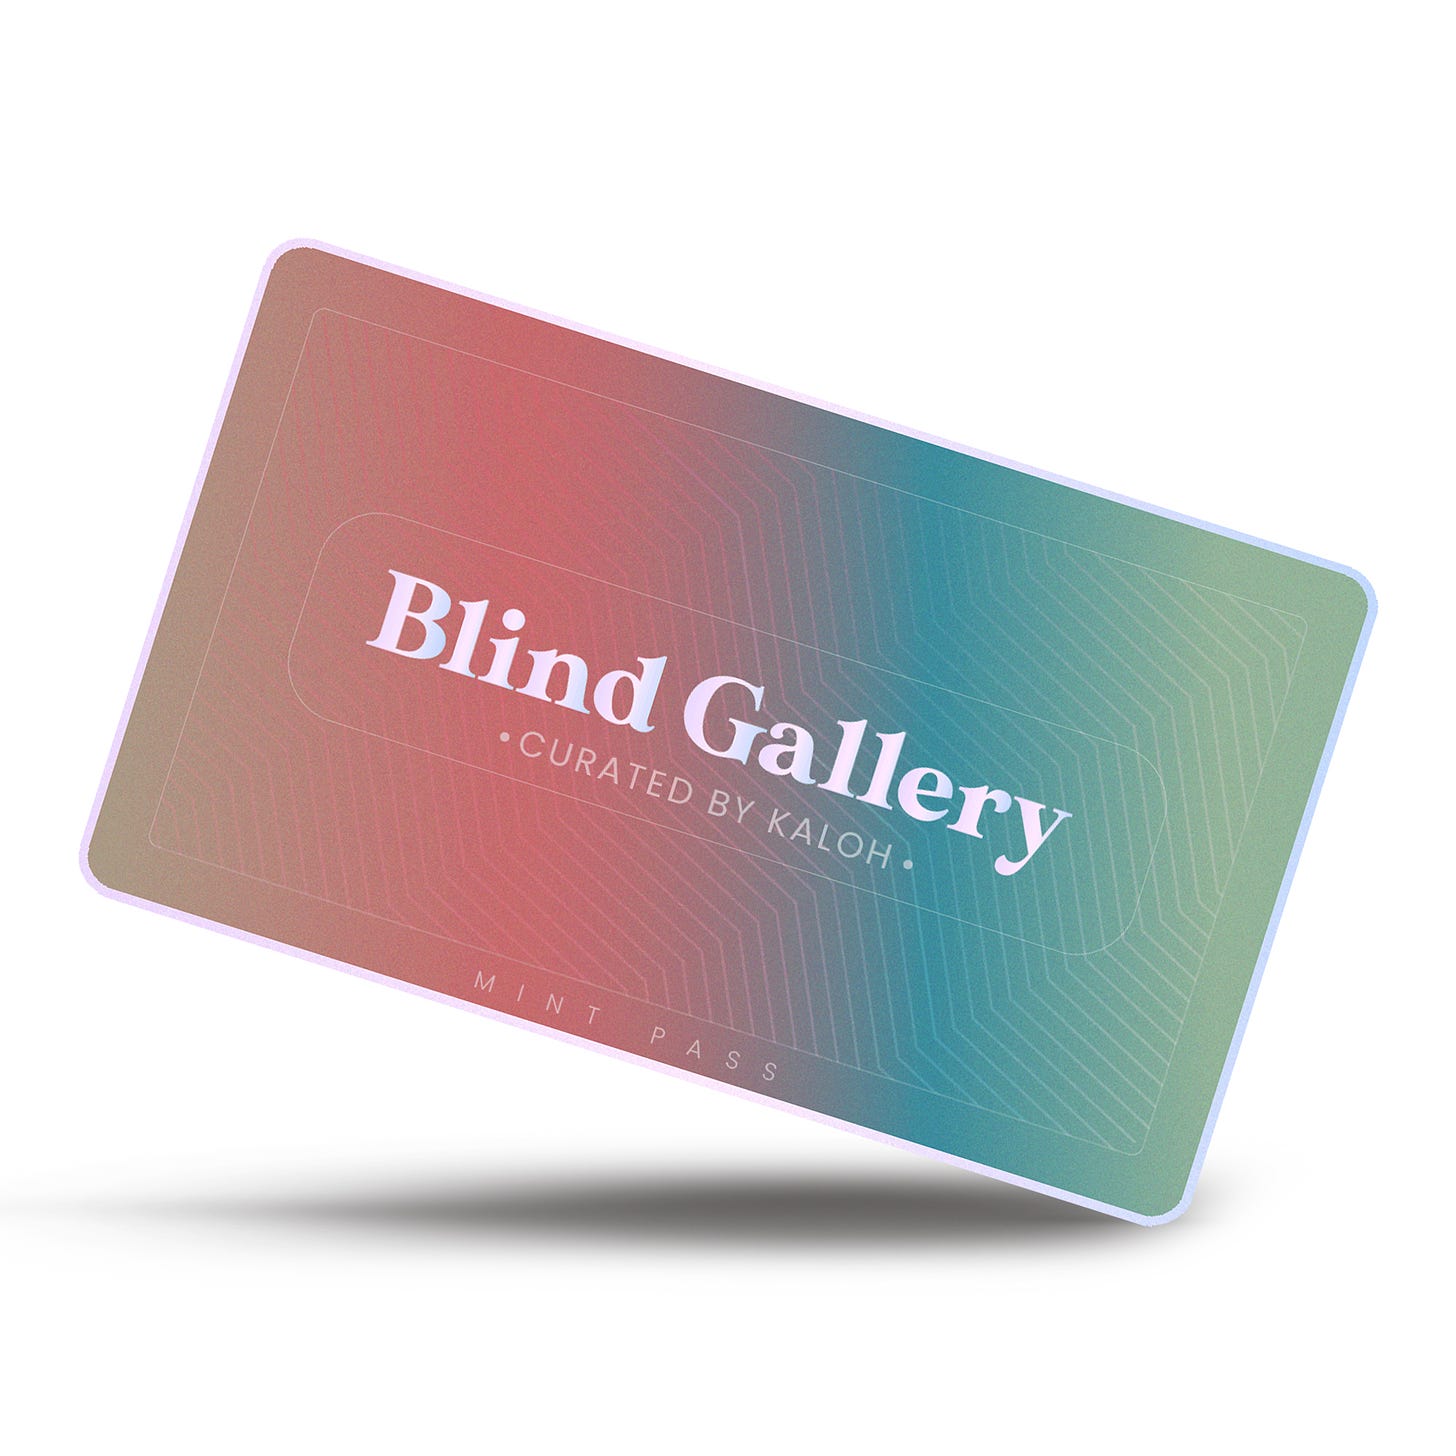 Blind Gallery’s Mint Pass